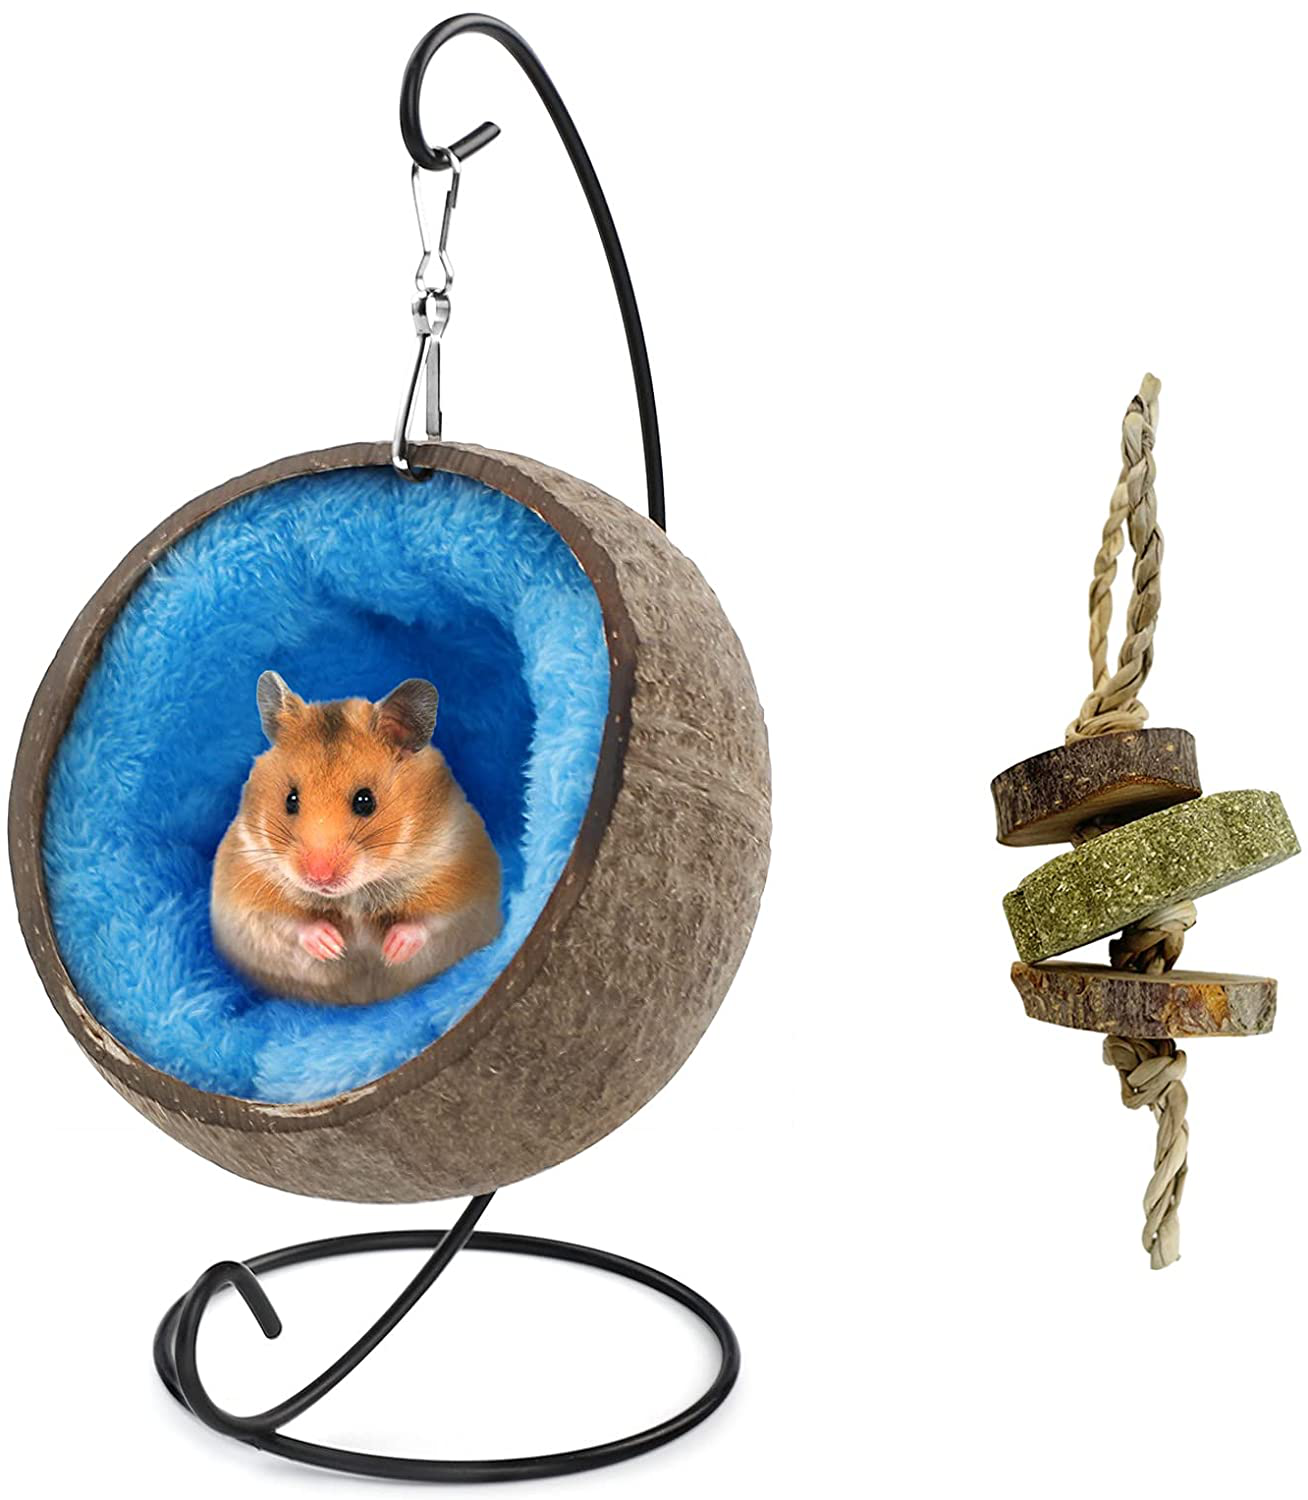 Ranslen Natural Coconut Hamster Hideout Hammock with Molar Toy,Suspension Coconut Husk Hamster Bed House with Warm Pad,Small Animal Habitat Decor Accessories Hanging Loop (Brown)